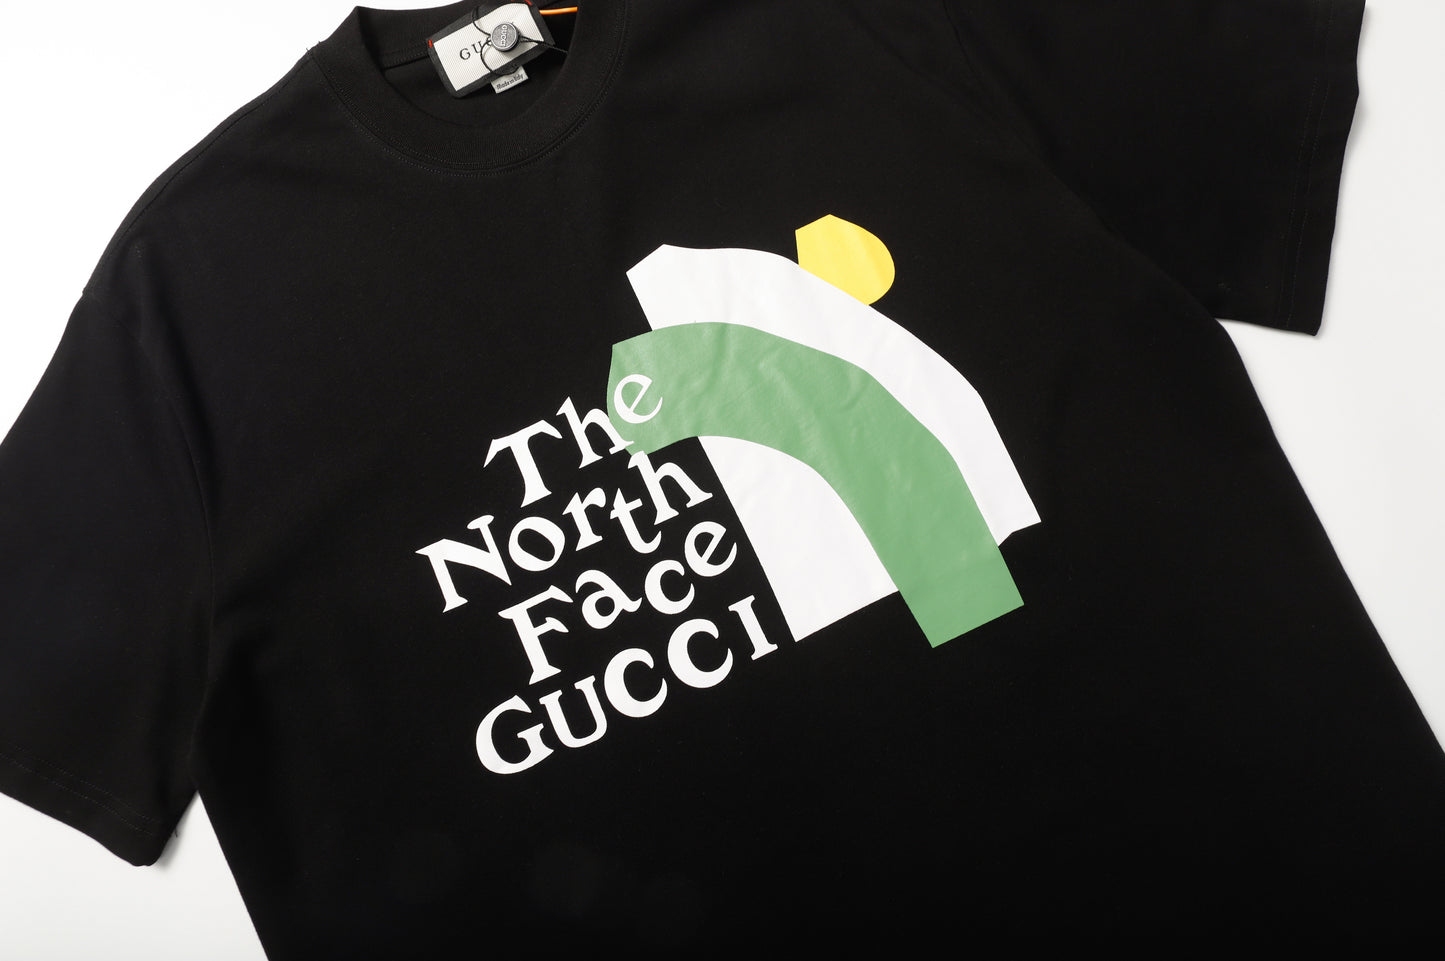 Gucci x The North Face T-Shirt